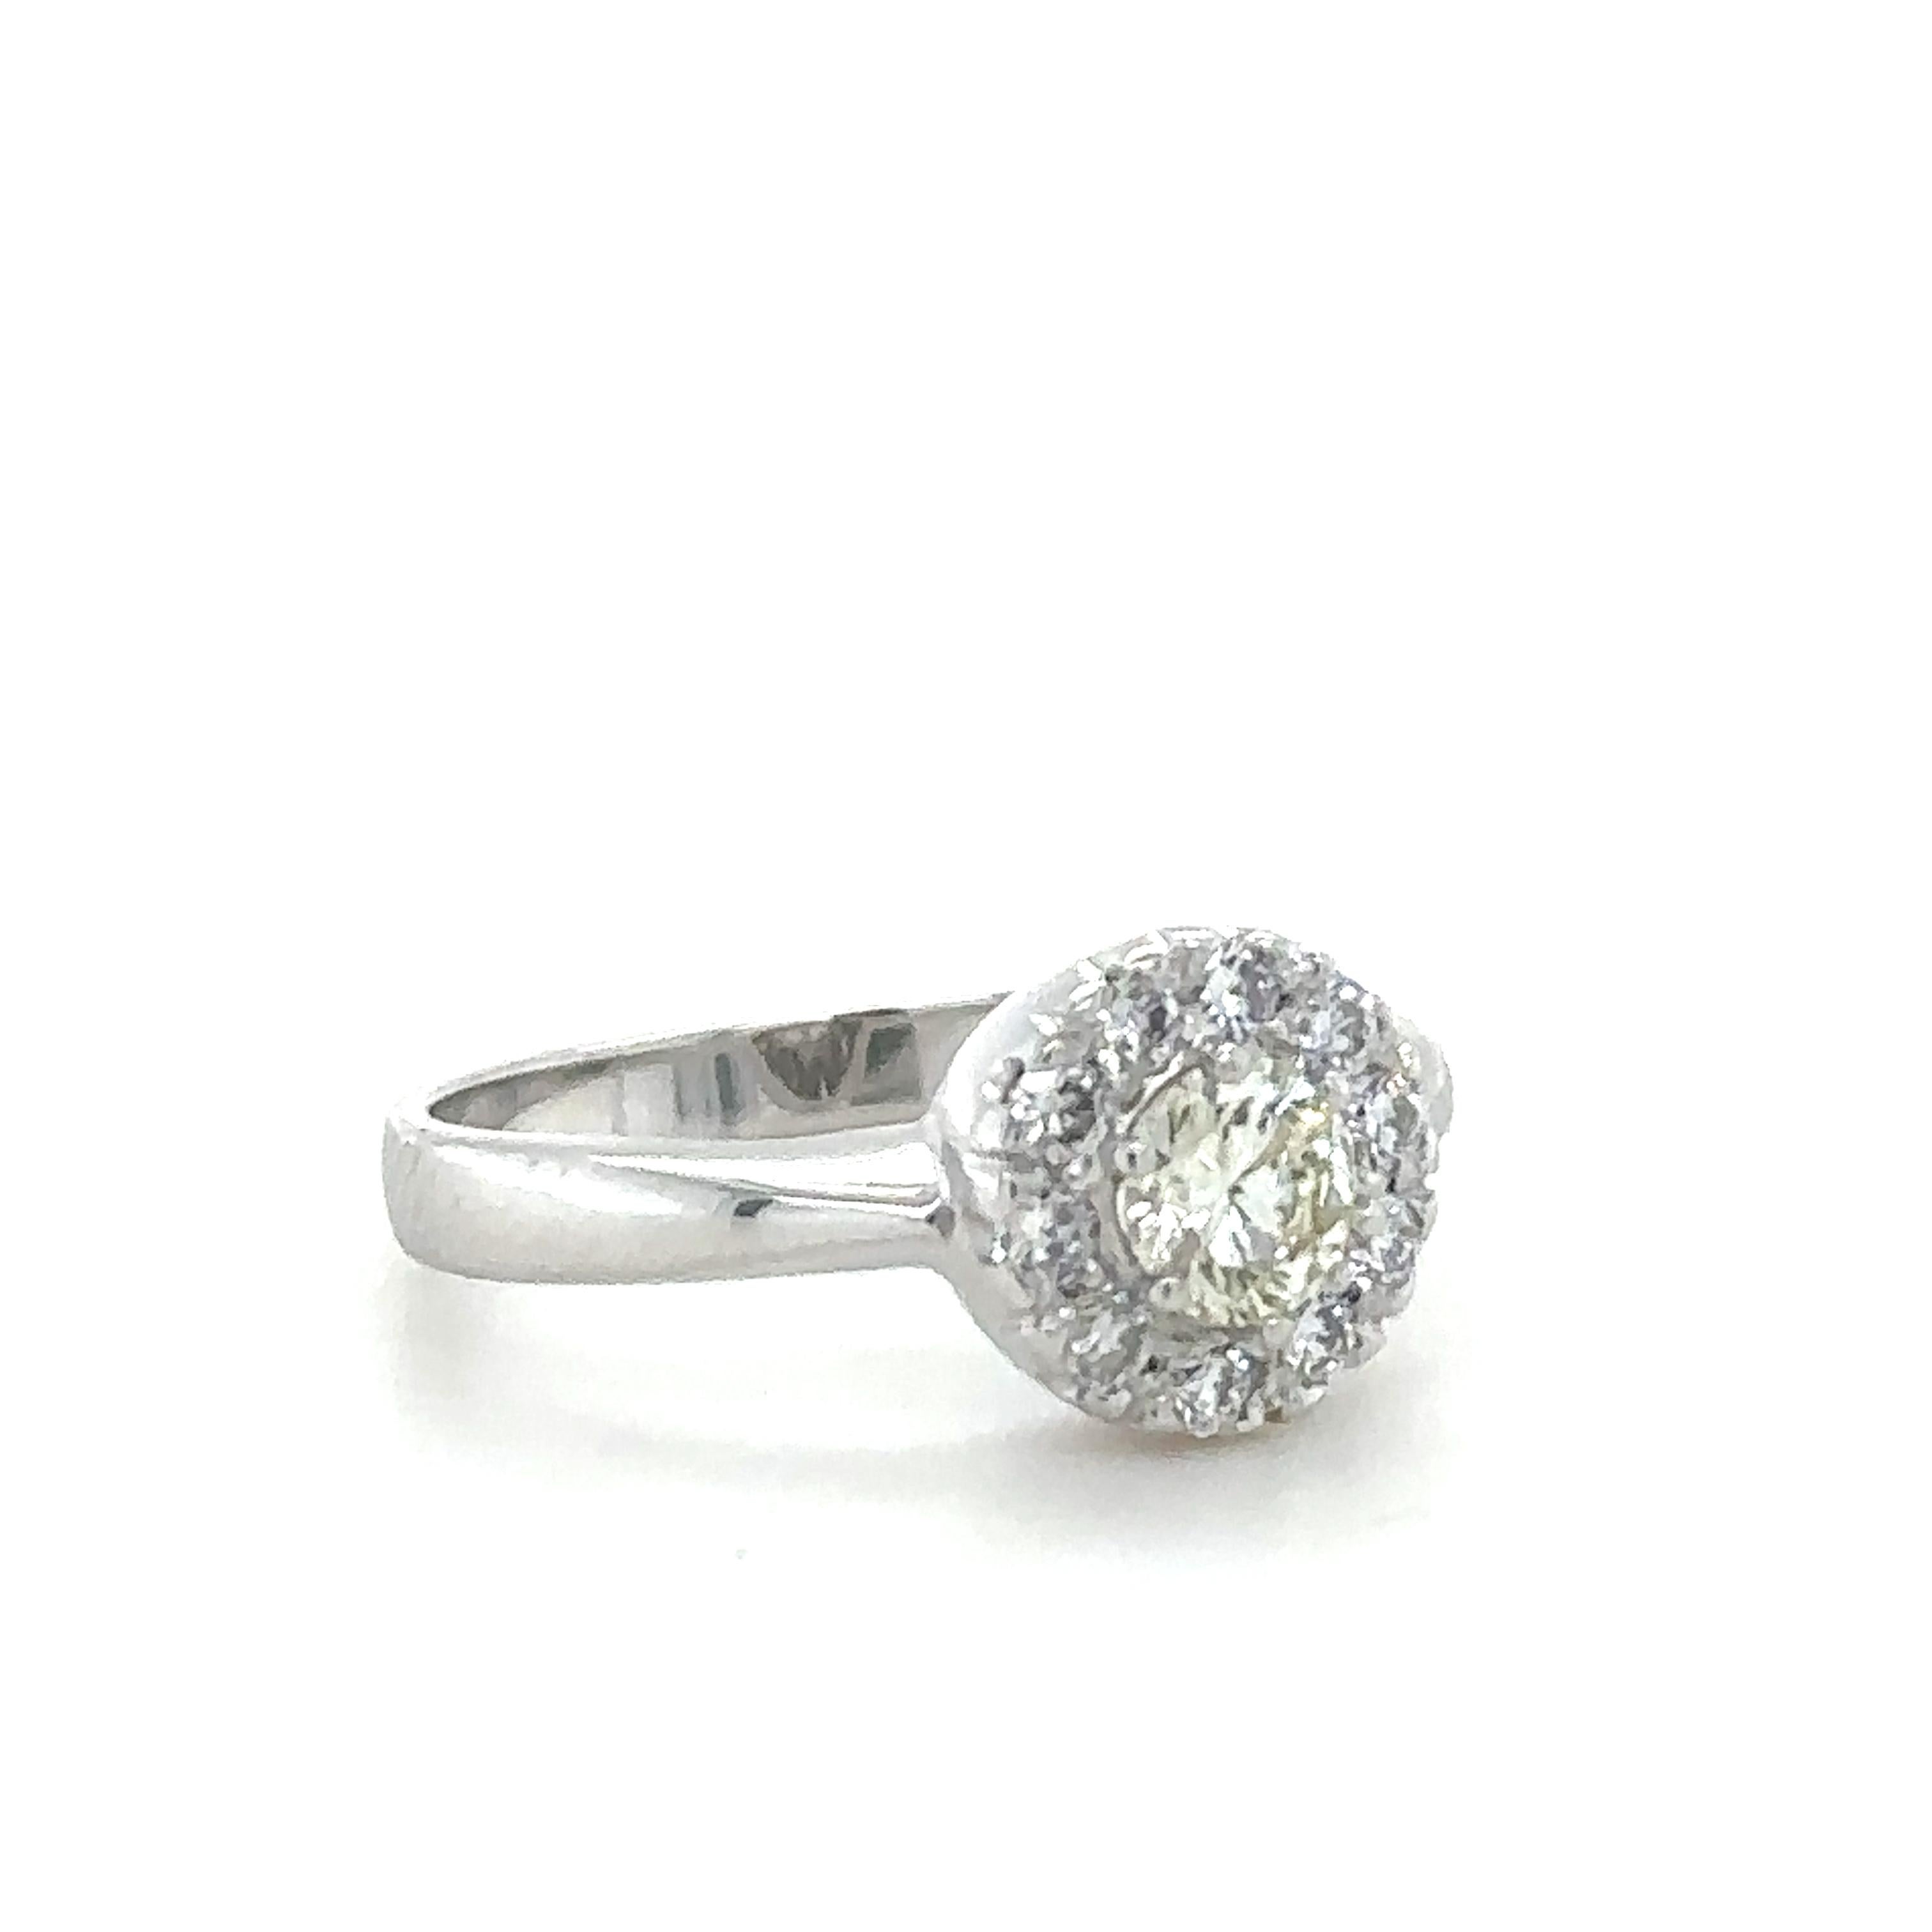 Brilliant Cut Bespoke Diamond Cluster Ring 0.63ct For Sale